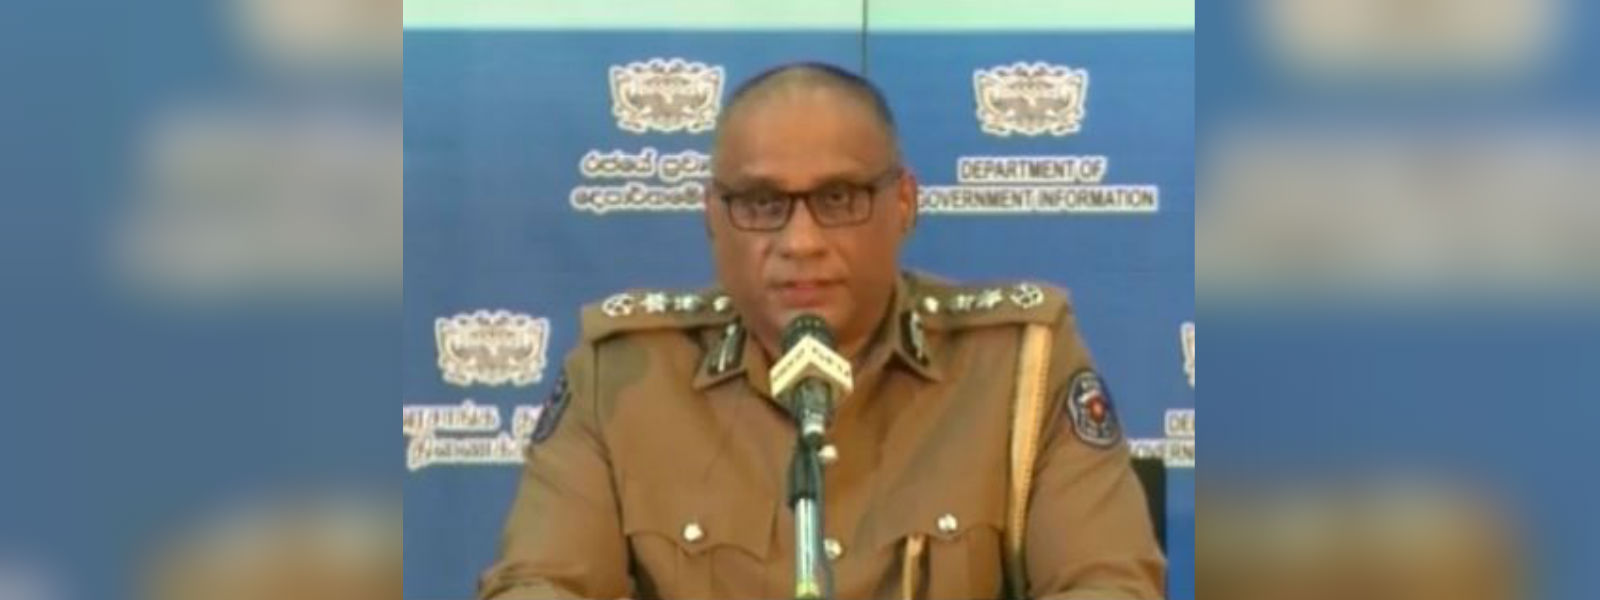 A warning by acting IGP  C.D. Wickramaratne